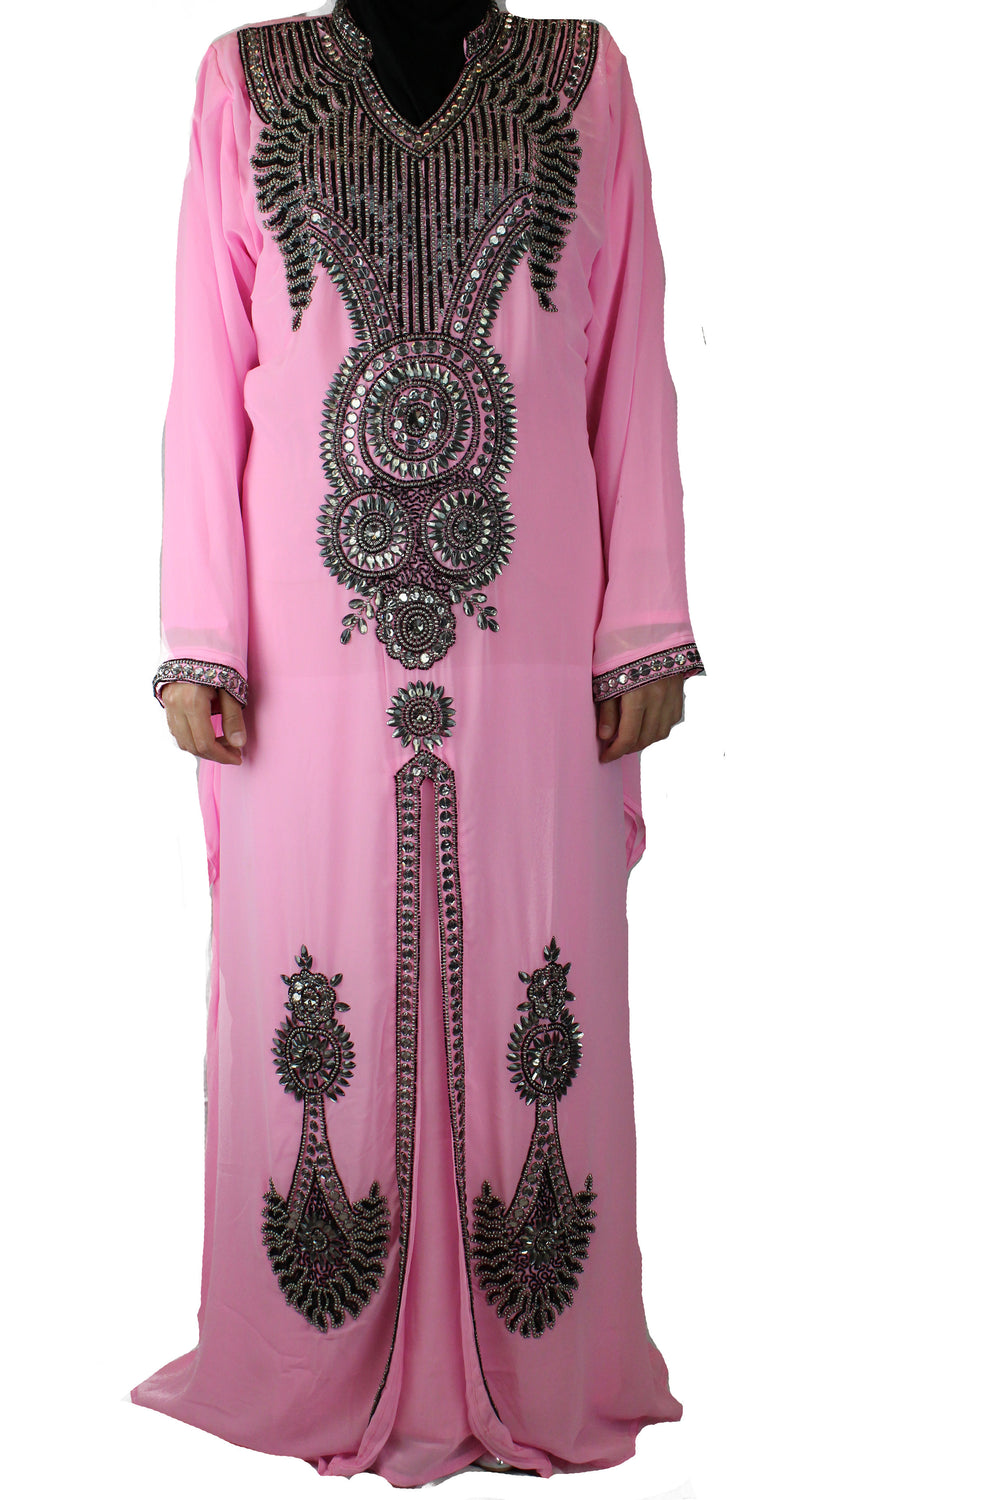 hand beaded light pink long sleeved maxi kaftan with jewels